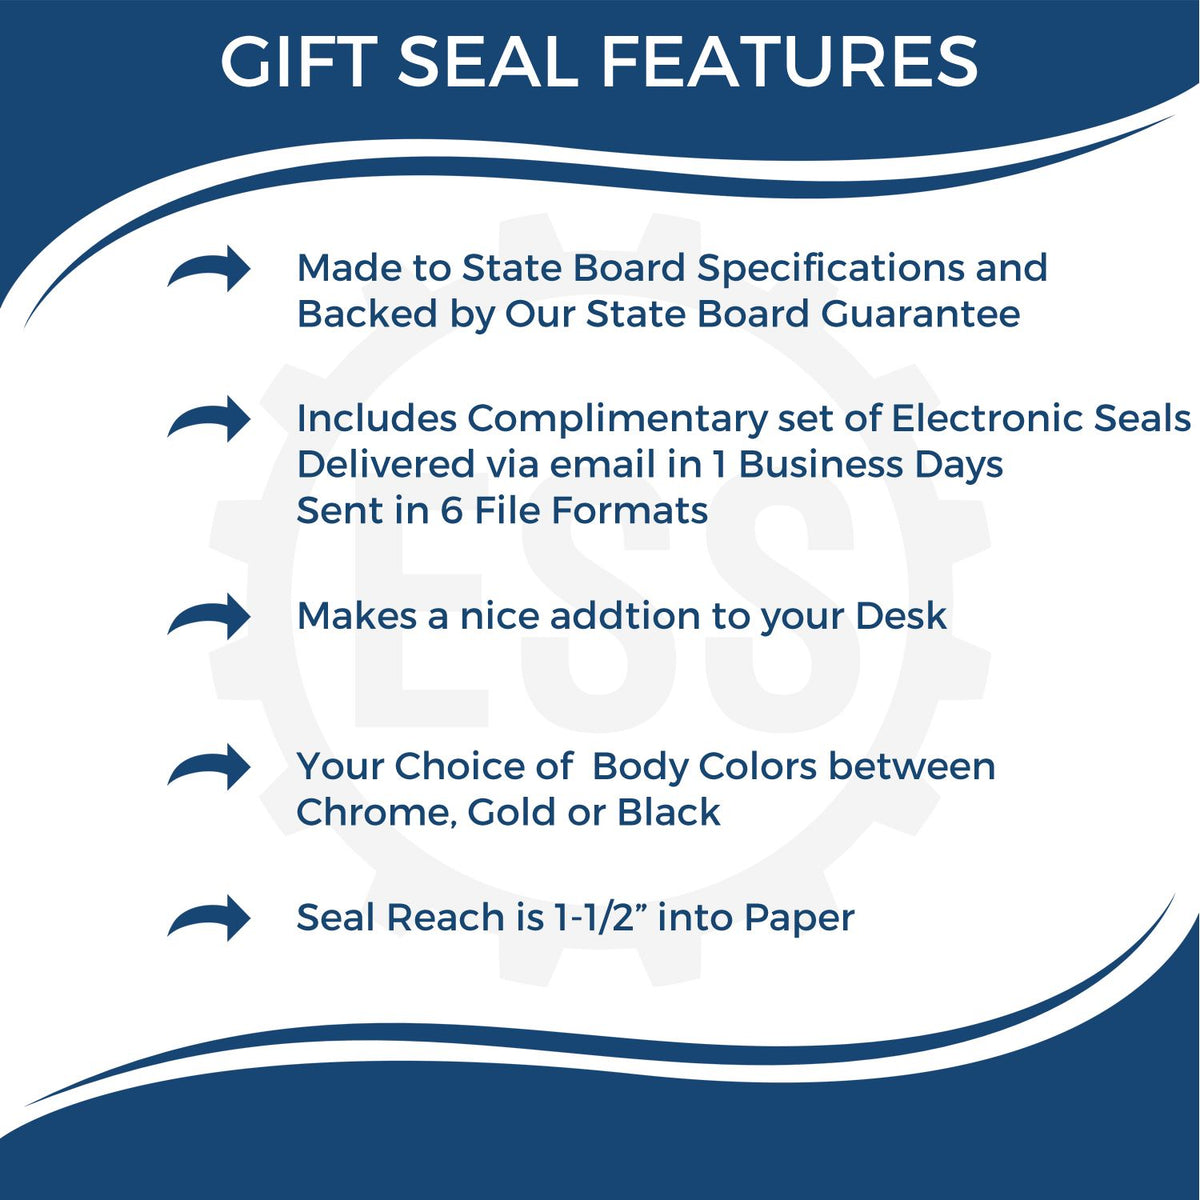 A picture of an infographic highlighting the selling points for the Gift Idaho Engineer Seal